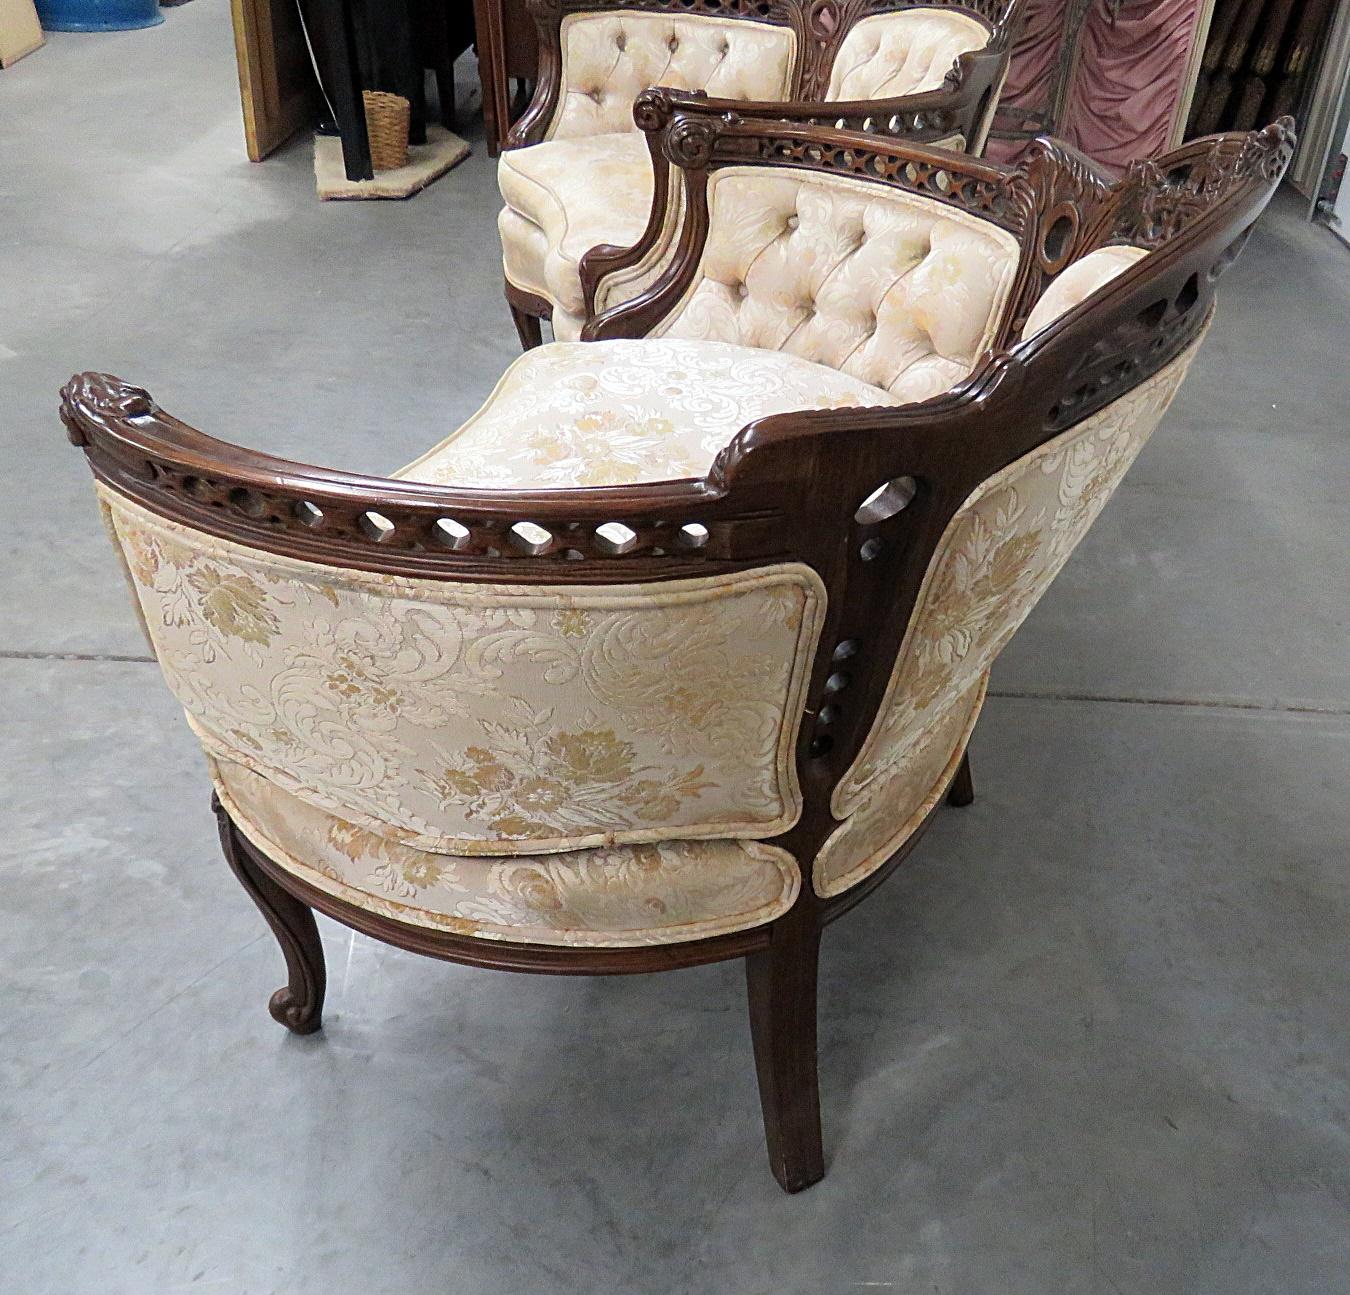 Pair of Louis XV style marquis with textured upholstery and tufted backs and sides.